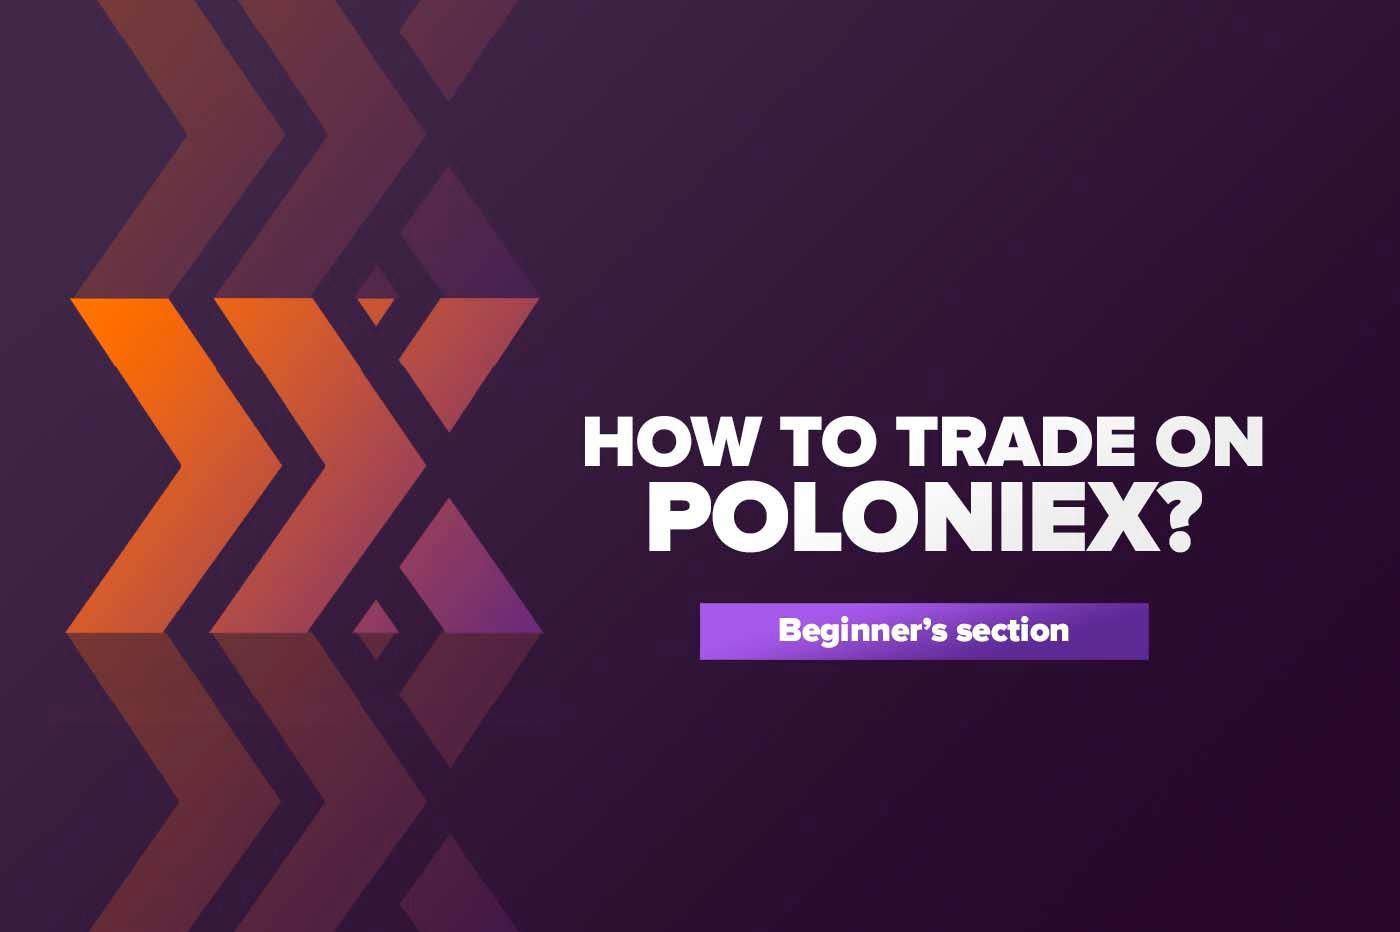 Article How to trade on Poloniex?